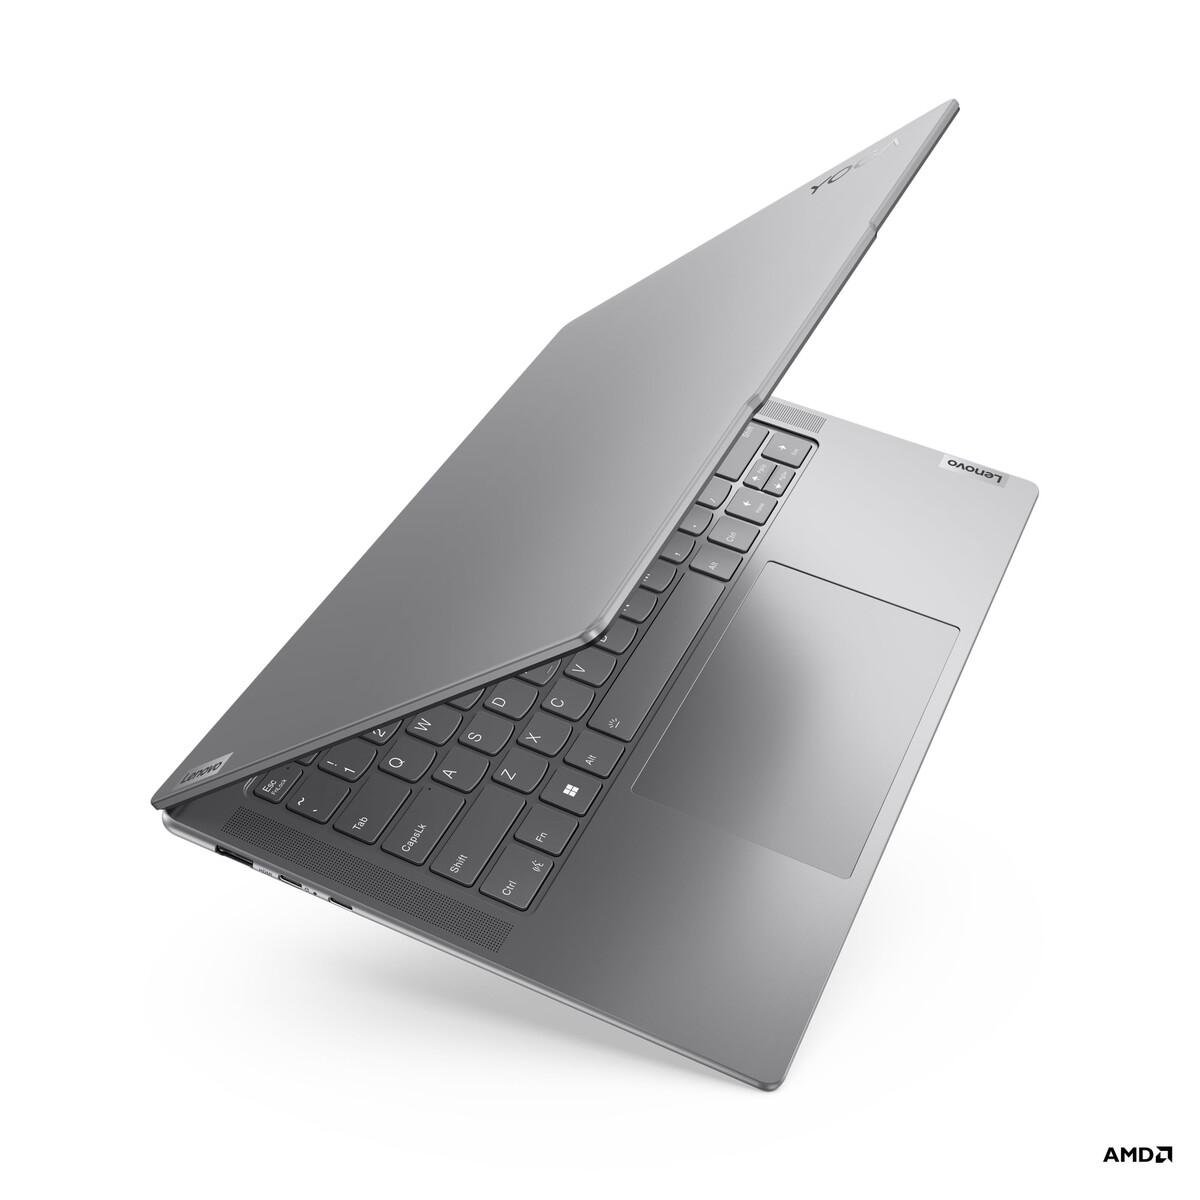 Lenovo's Latest Line-up of New Yoga Laptops Empower Creators from